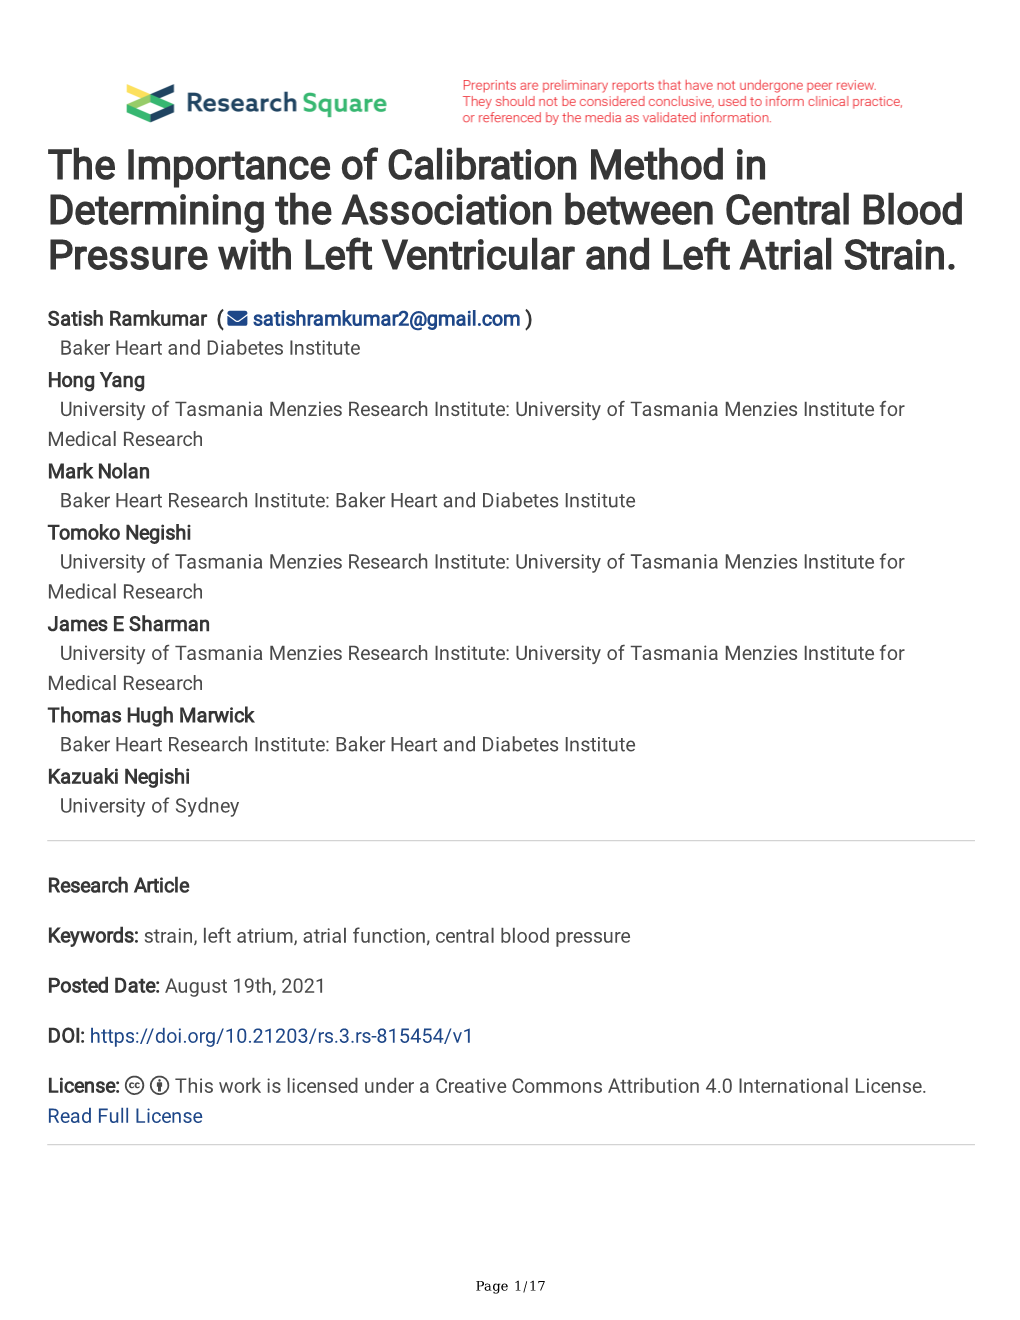 The Importance of Calibration Method in Determining the Association Between Central Blood Pressure with Left Ventricular and Left Atrial Strain